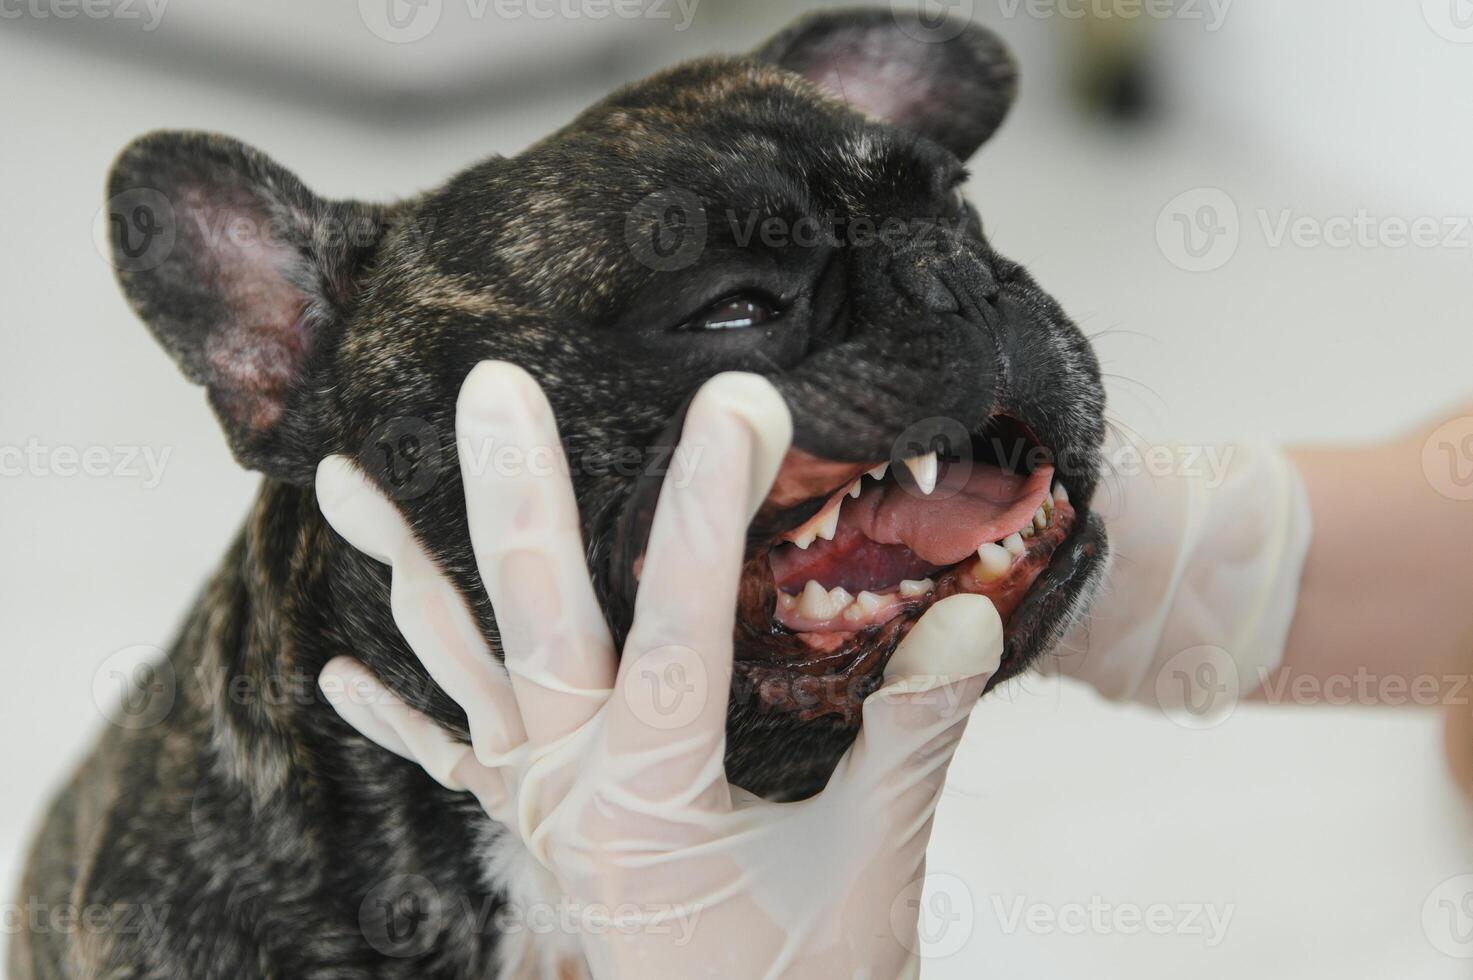 Veterinarian woman examines the dog and pet her. Animal healthcare hospital with professional pet help photo